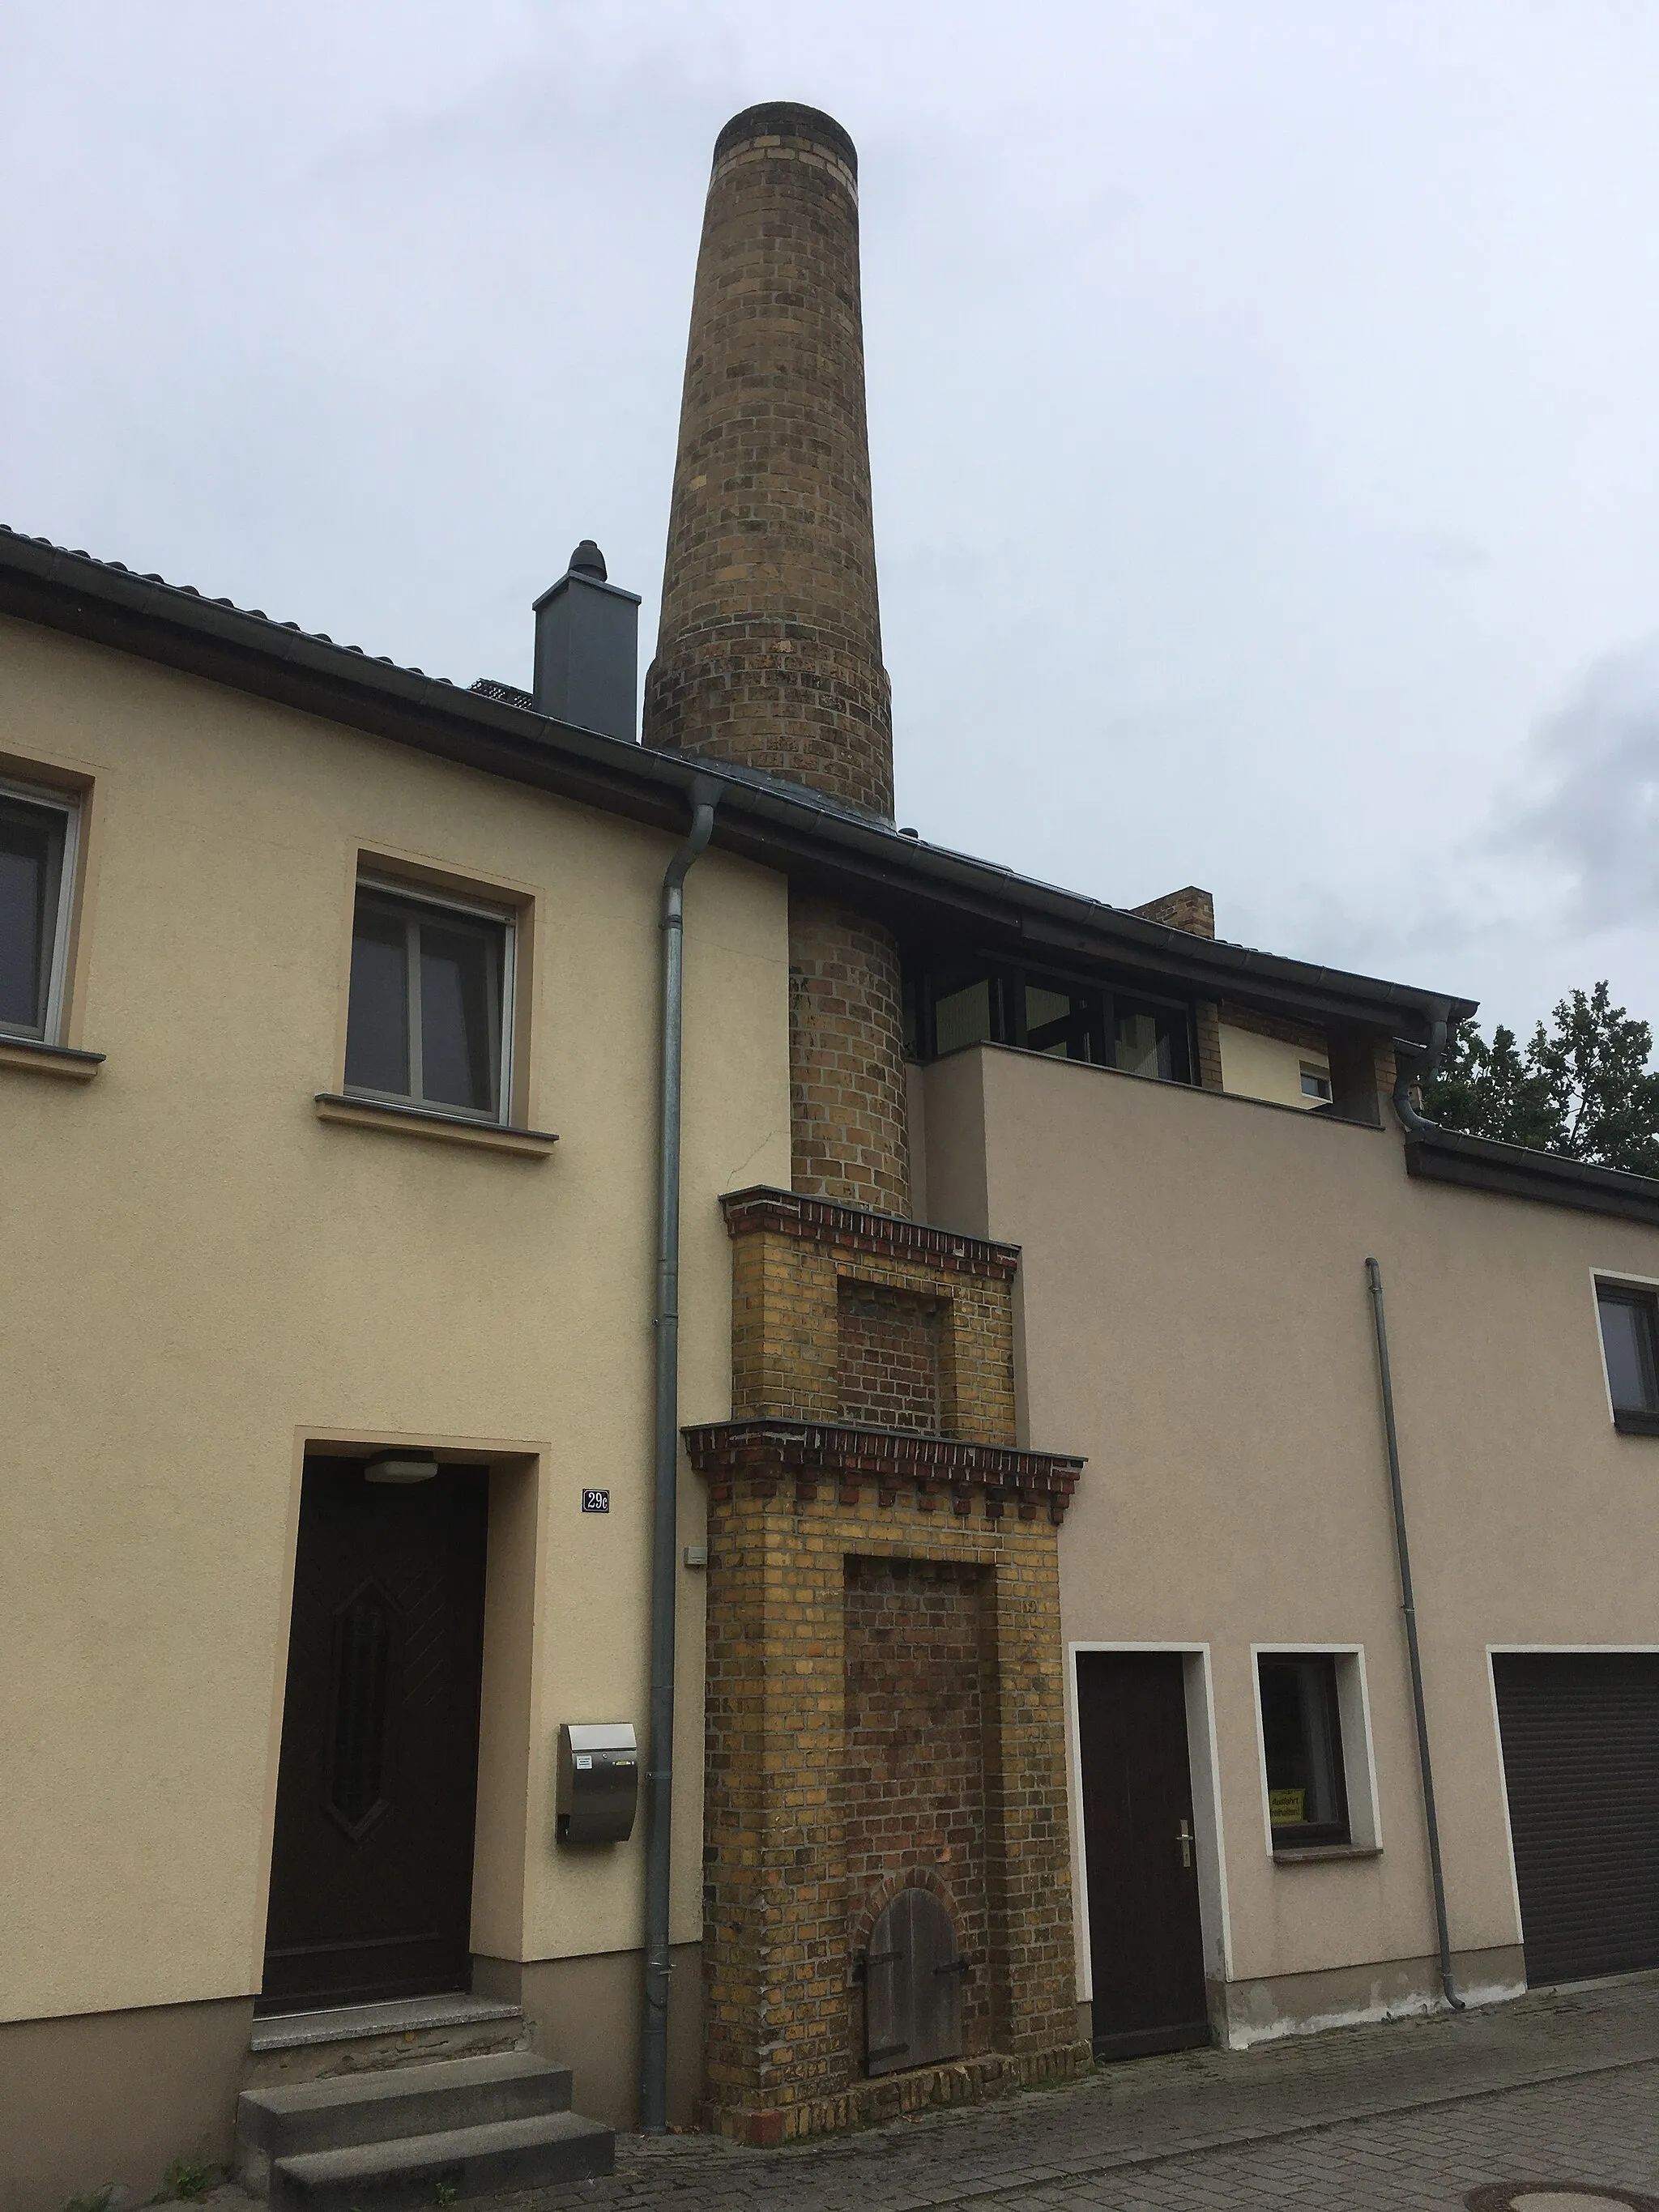 Photo showing: Chimney as a relic of a brewery in Schleife), Friedensstraße 29; around 1900; yellow clinker chimney, of importance for its building history and local history; cultural heritage monument